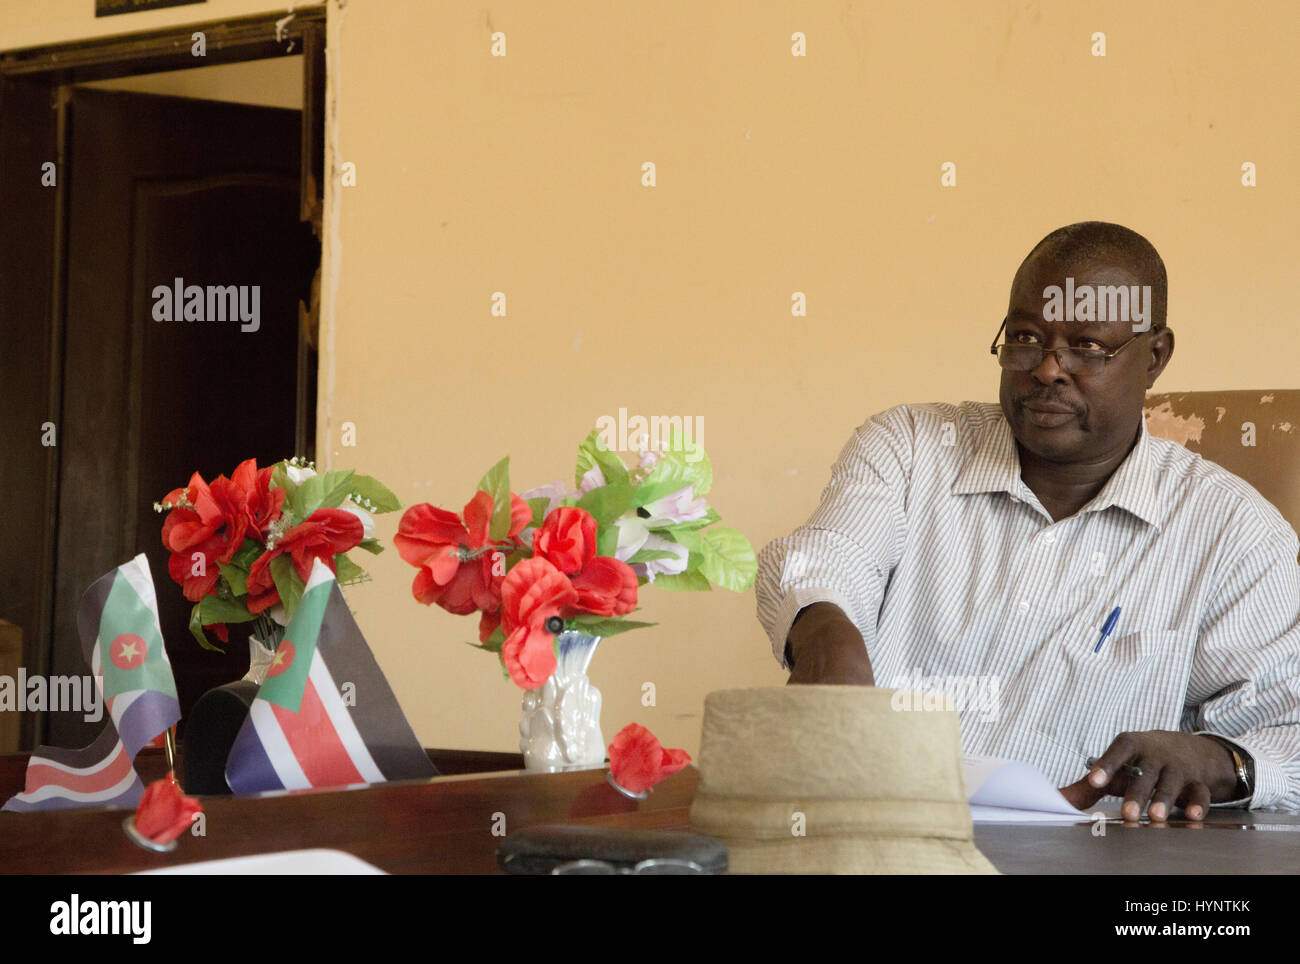 Kauda, Sudan. 21st Feb, 2017. Suleiman Jabona, deputy governer, sits at his desk in a government building in Kauda, Sudan, 21 February 2017. Kauda is the capital of the rebel-held areas. The Nuba mountains are held by the Sudanese Liberation Army and their political branch (SPLM-N). Photo: Laura Wagenknecht/dpa/Alamy Live News Stock Photo